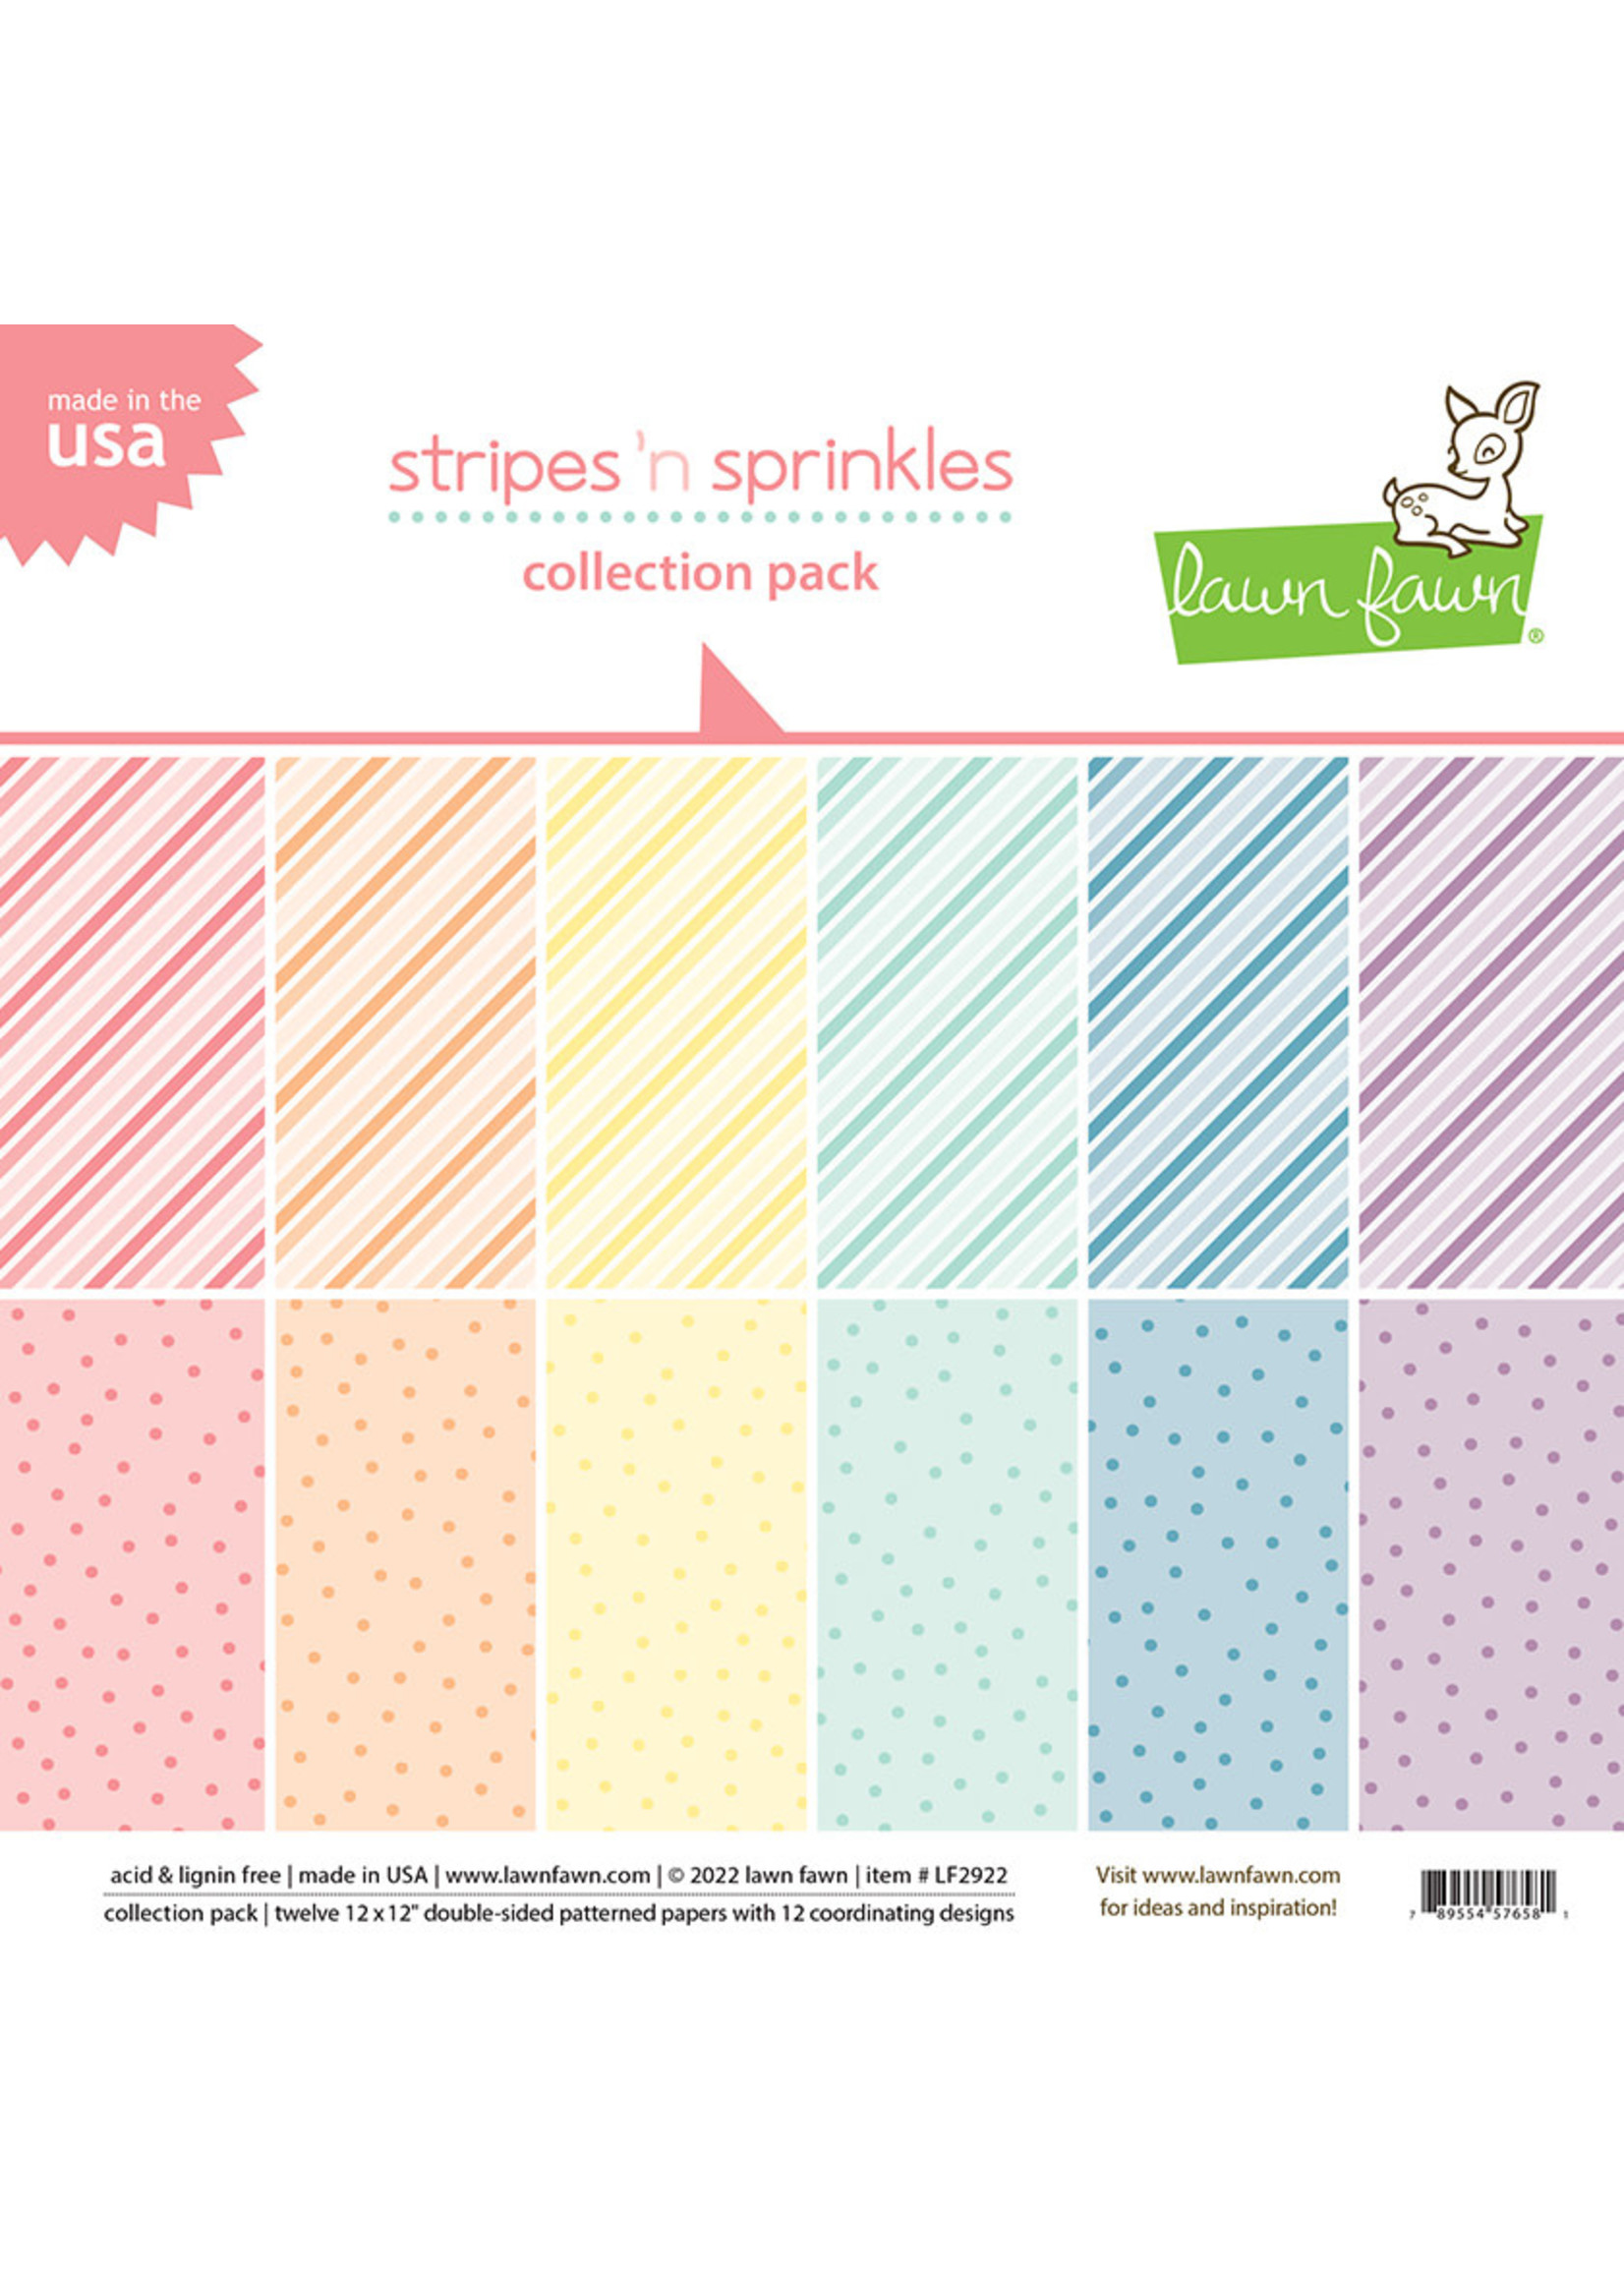 Lawn Fawn Stripes 'n Sprinkles Collection Pack 12x12